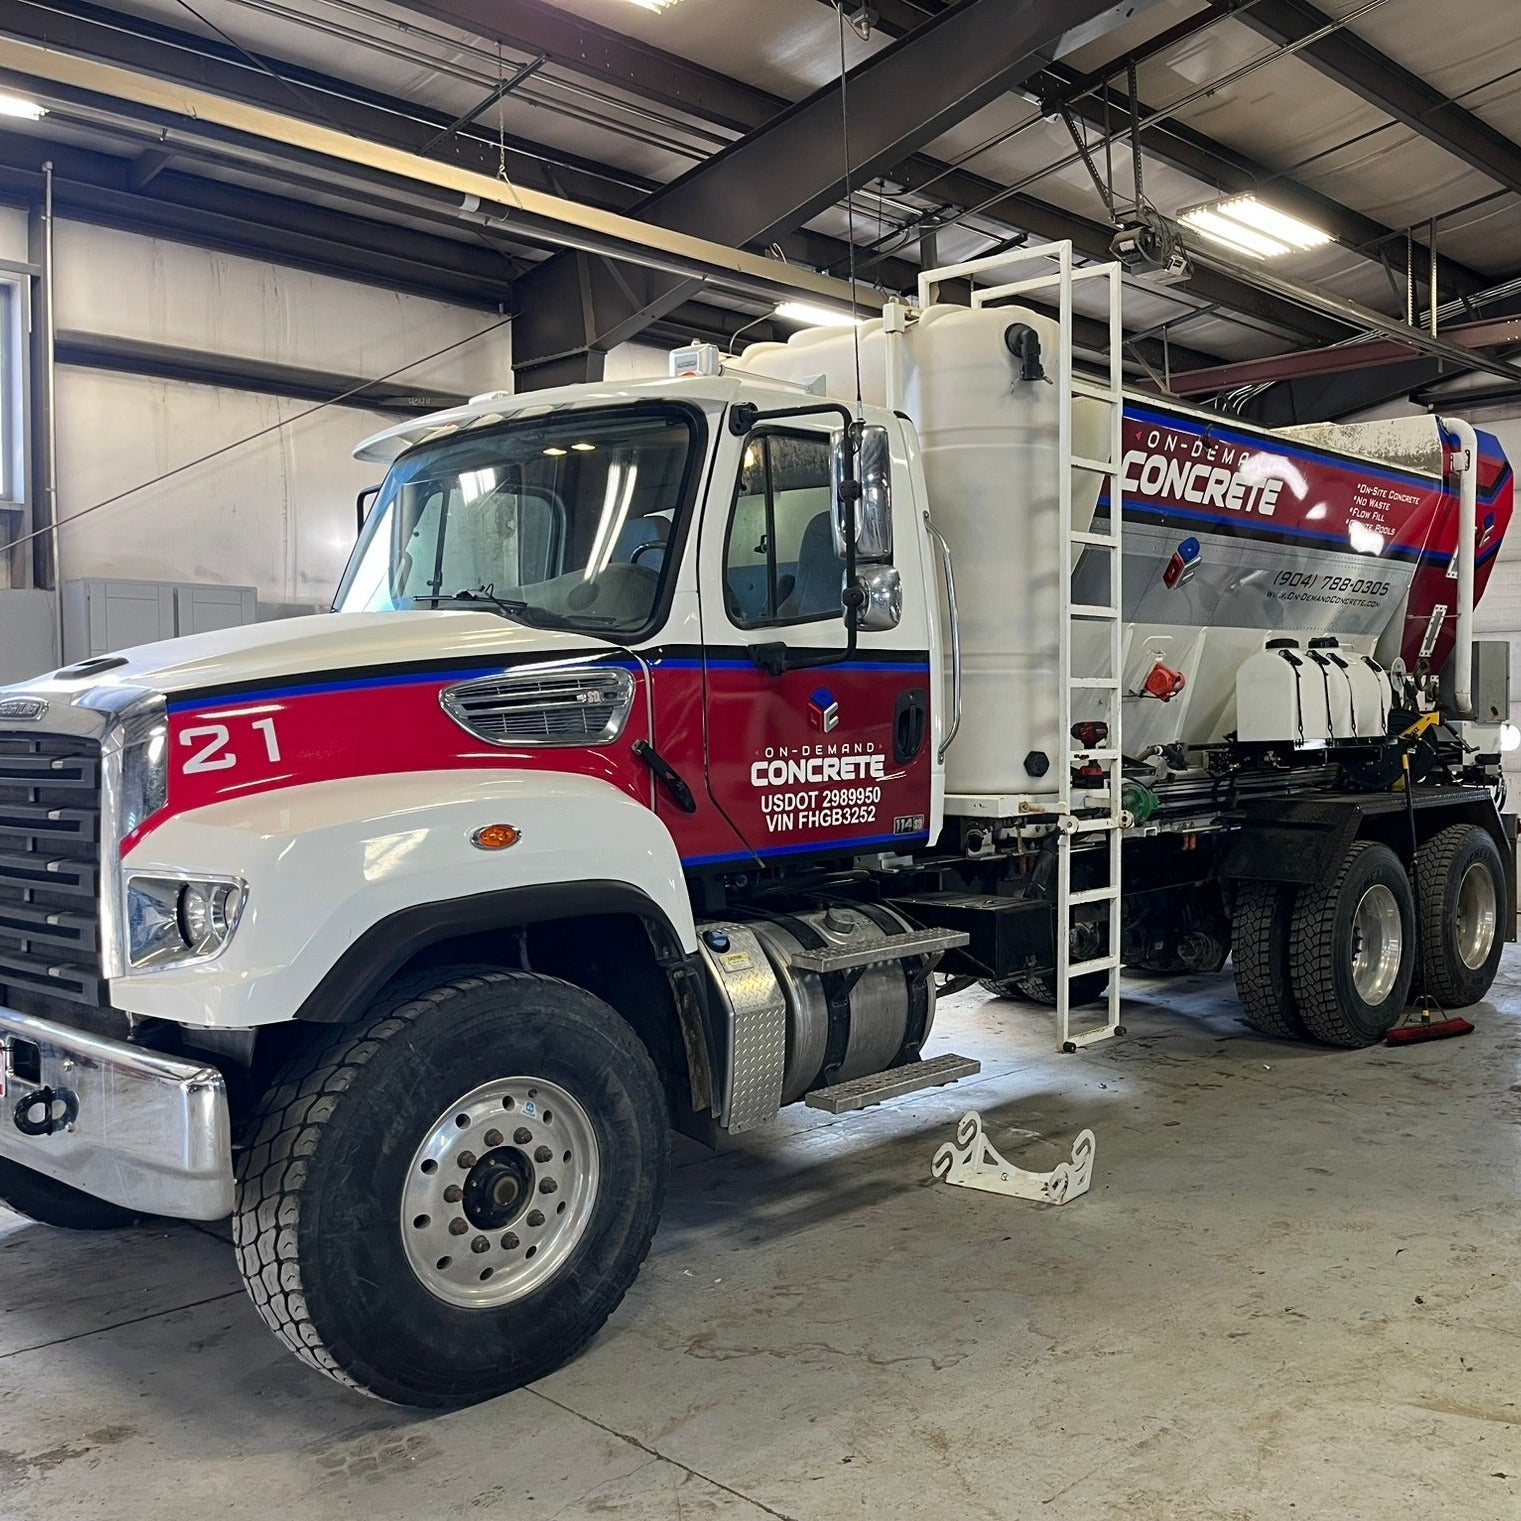 Freightliner Truck with Holcombe Volumetric Concrete Mixer